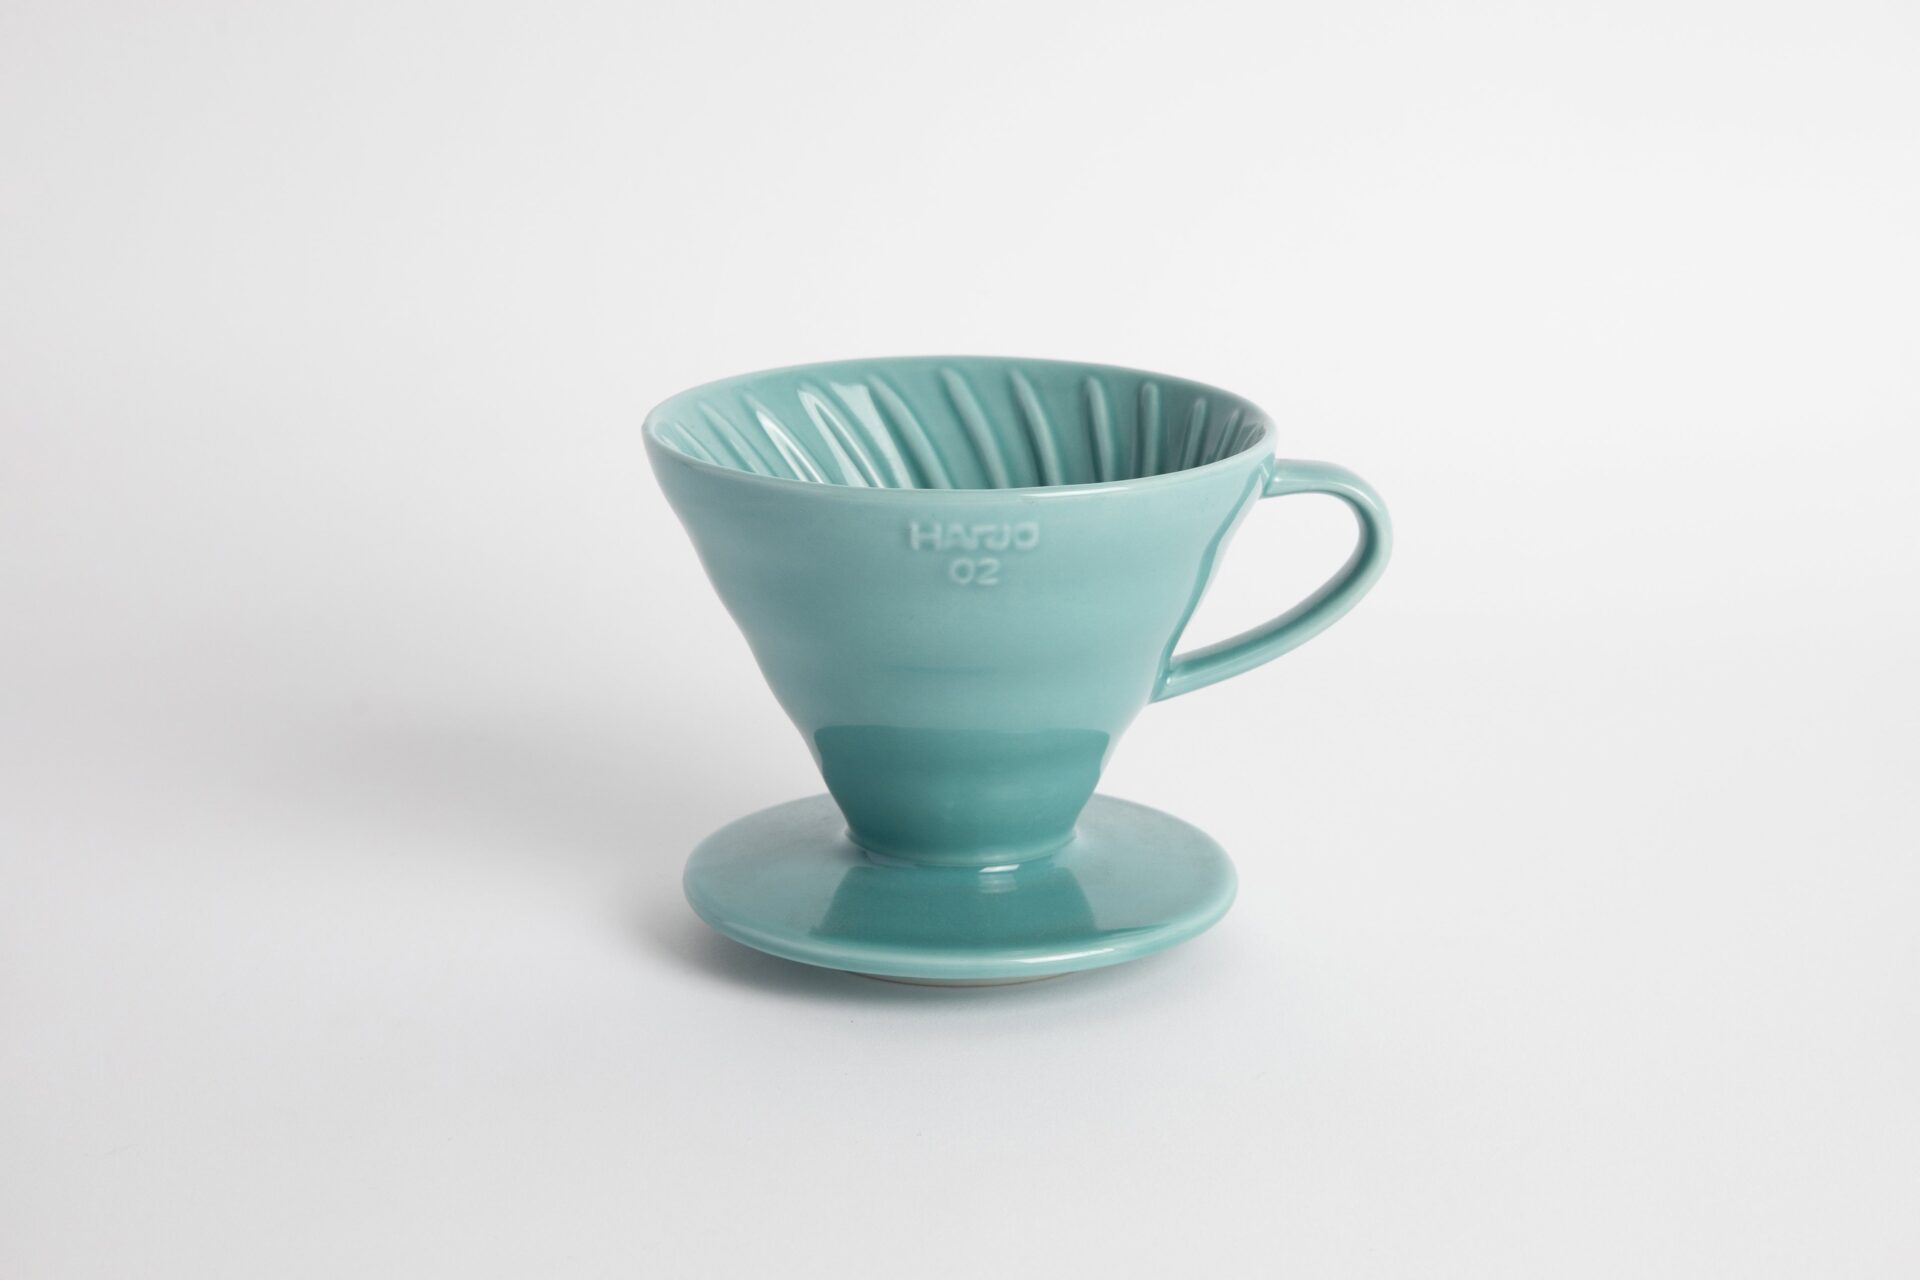 Brew coffee without using plastic with a v60 ceramic coffee maker 